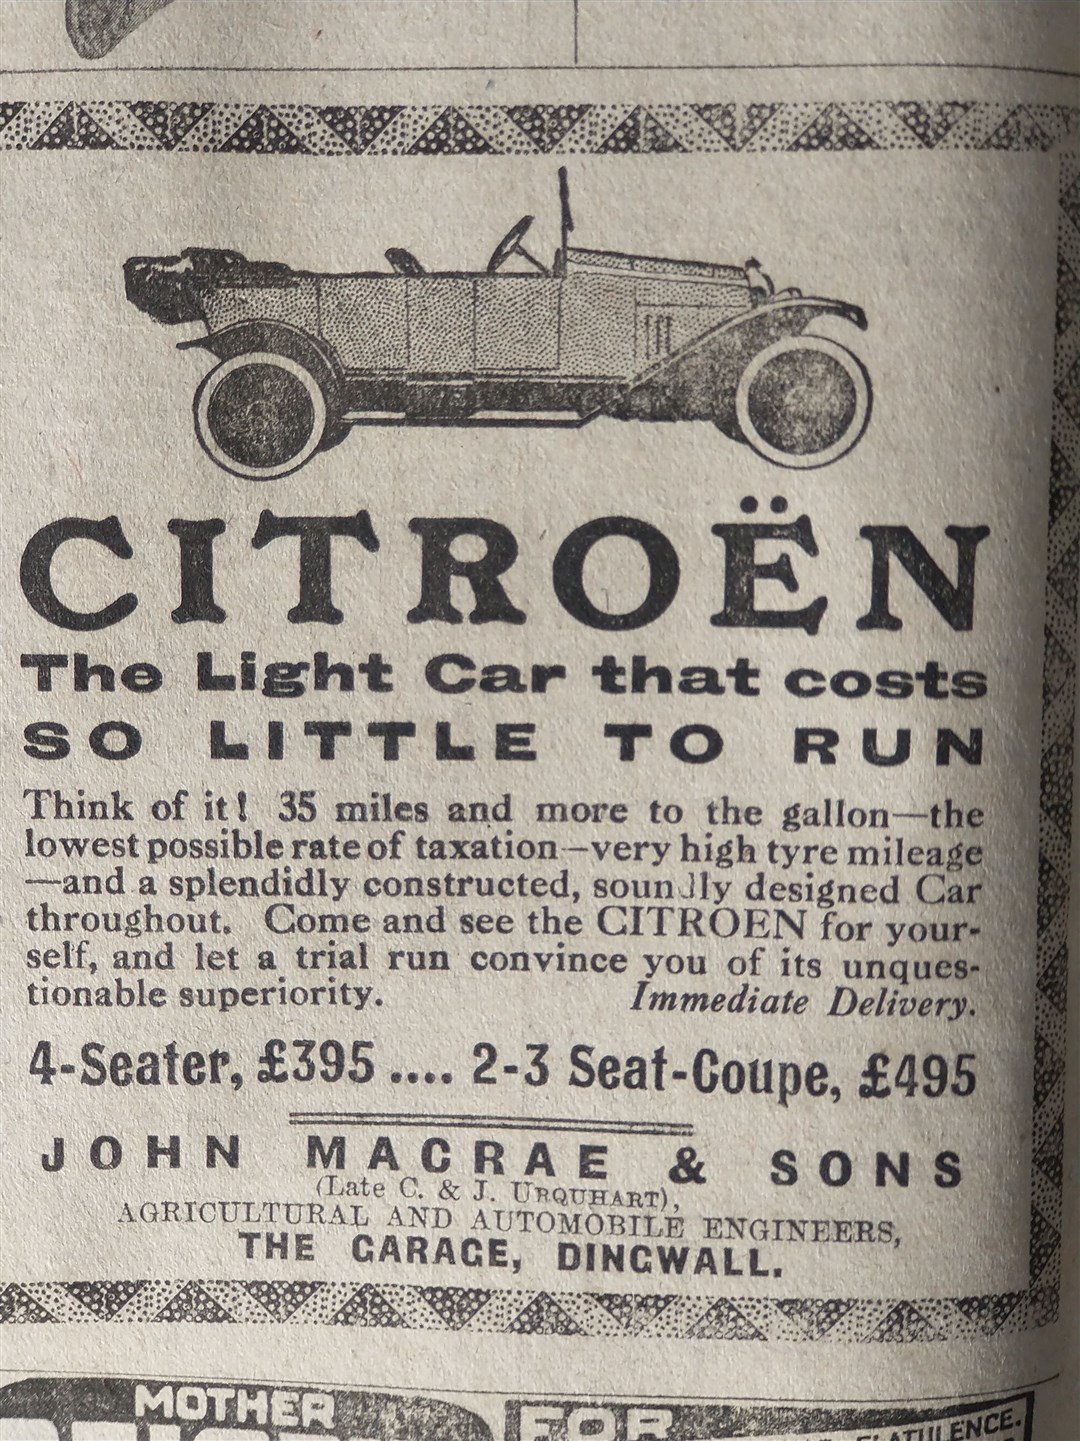 An advert for a Citroen motor car 100 years ago in the Ross-shire.